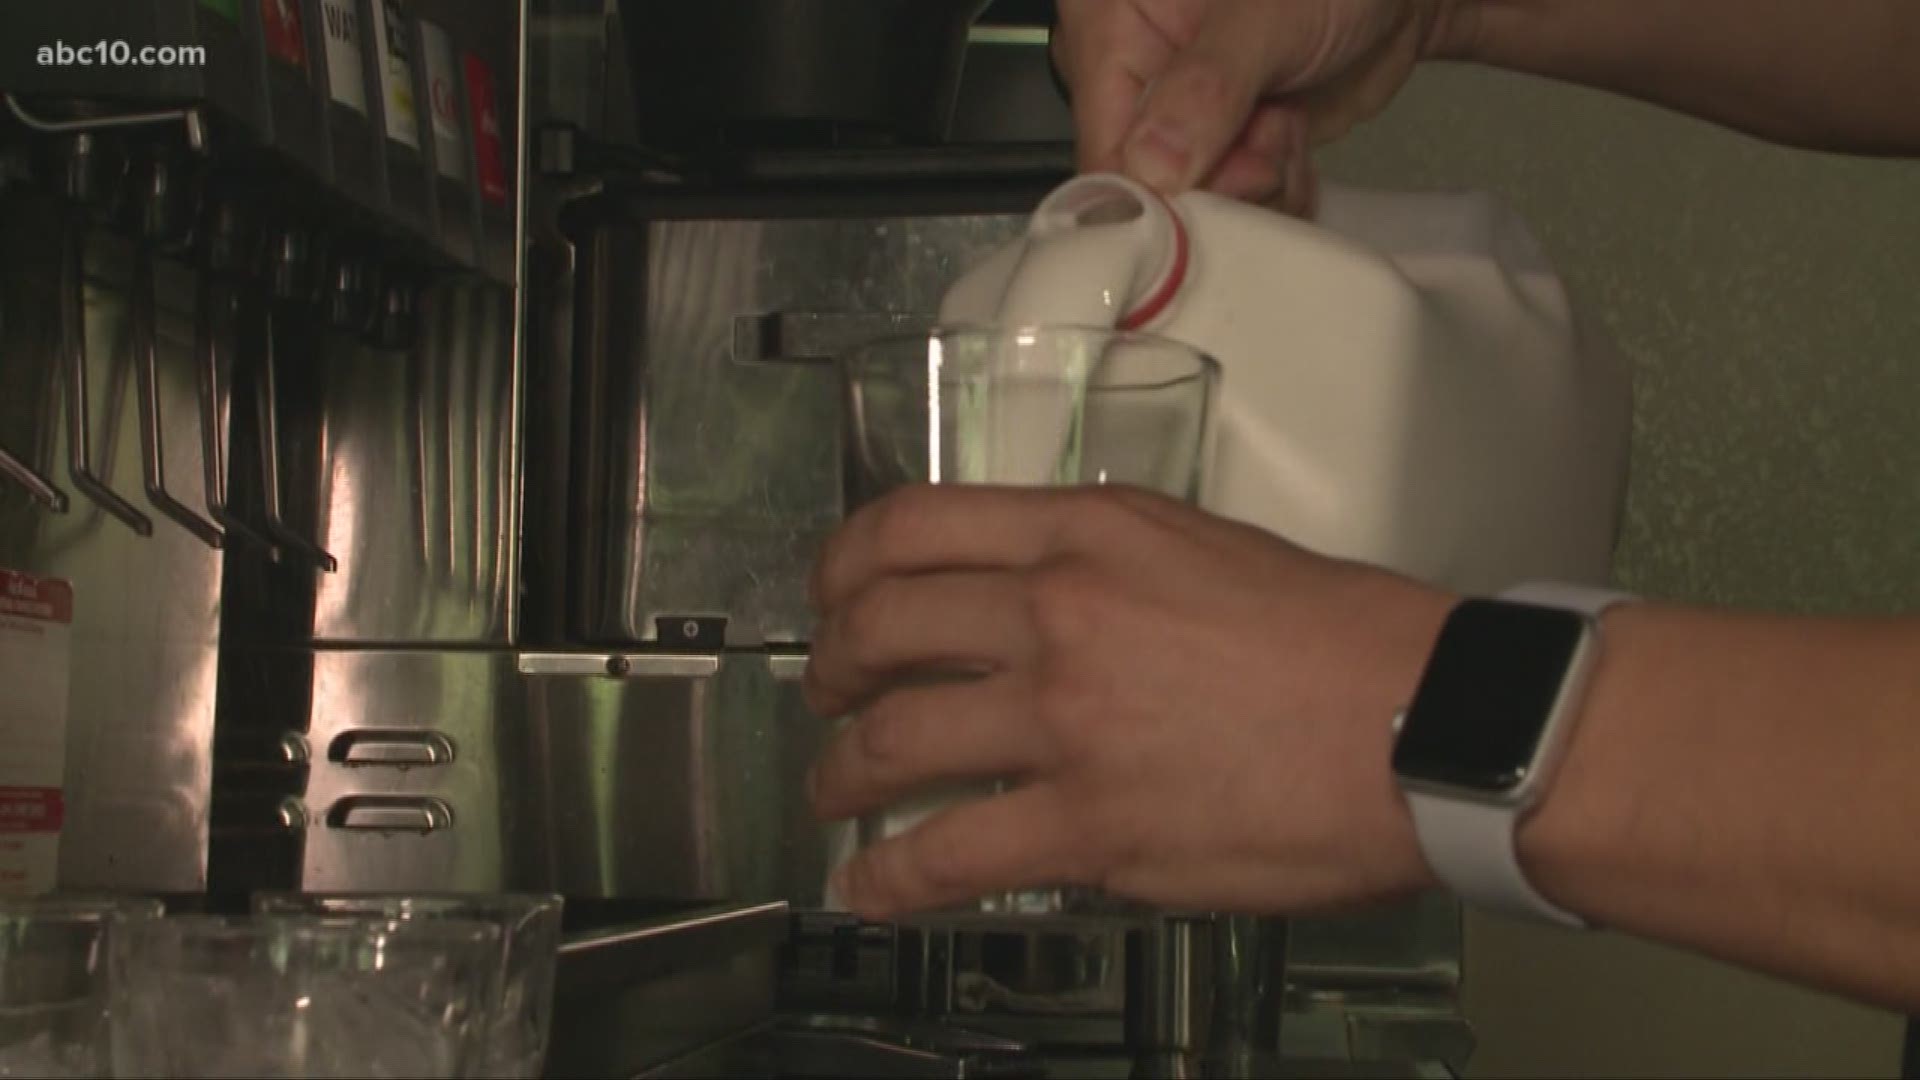 The law says if you don't specify what you want to drink for your kids meal - they'll default with water or milk.